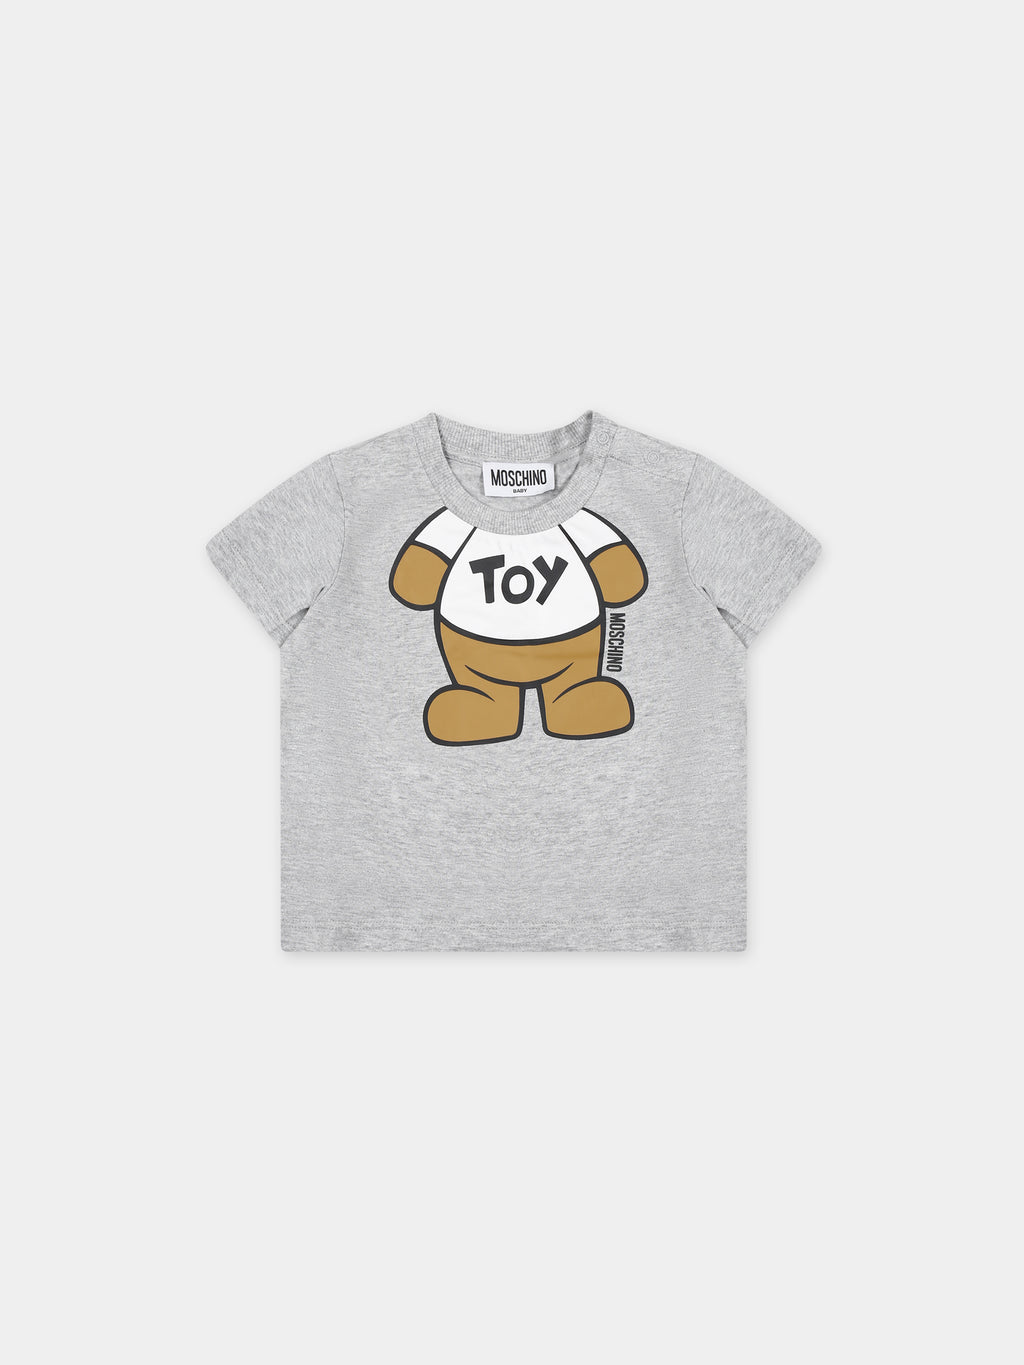 Gray t-shirt for babies with Teddy Bear